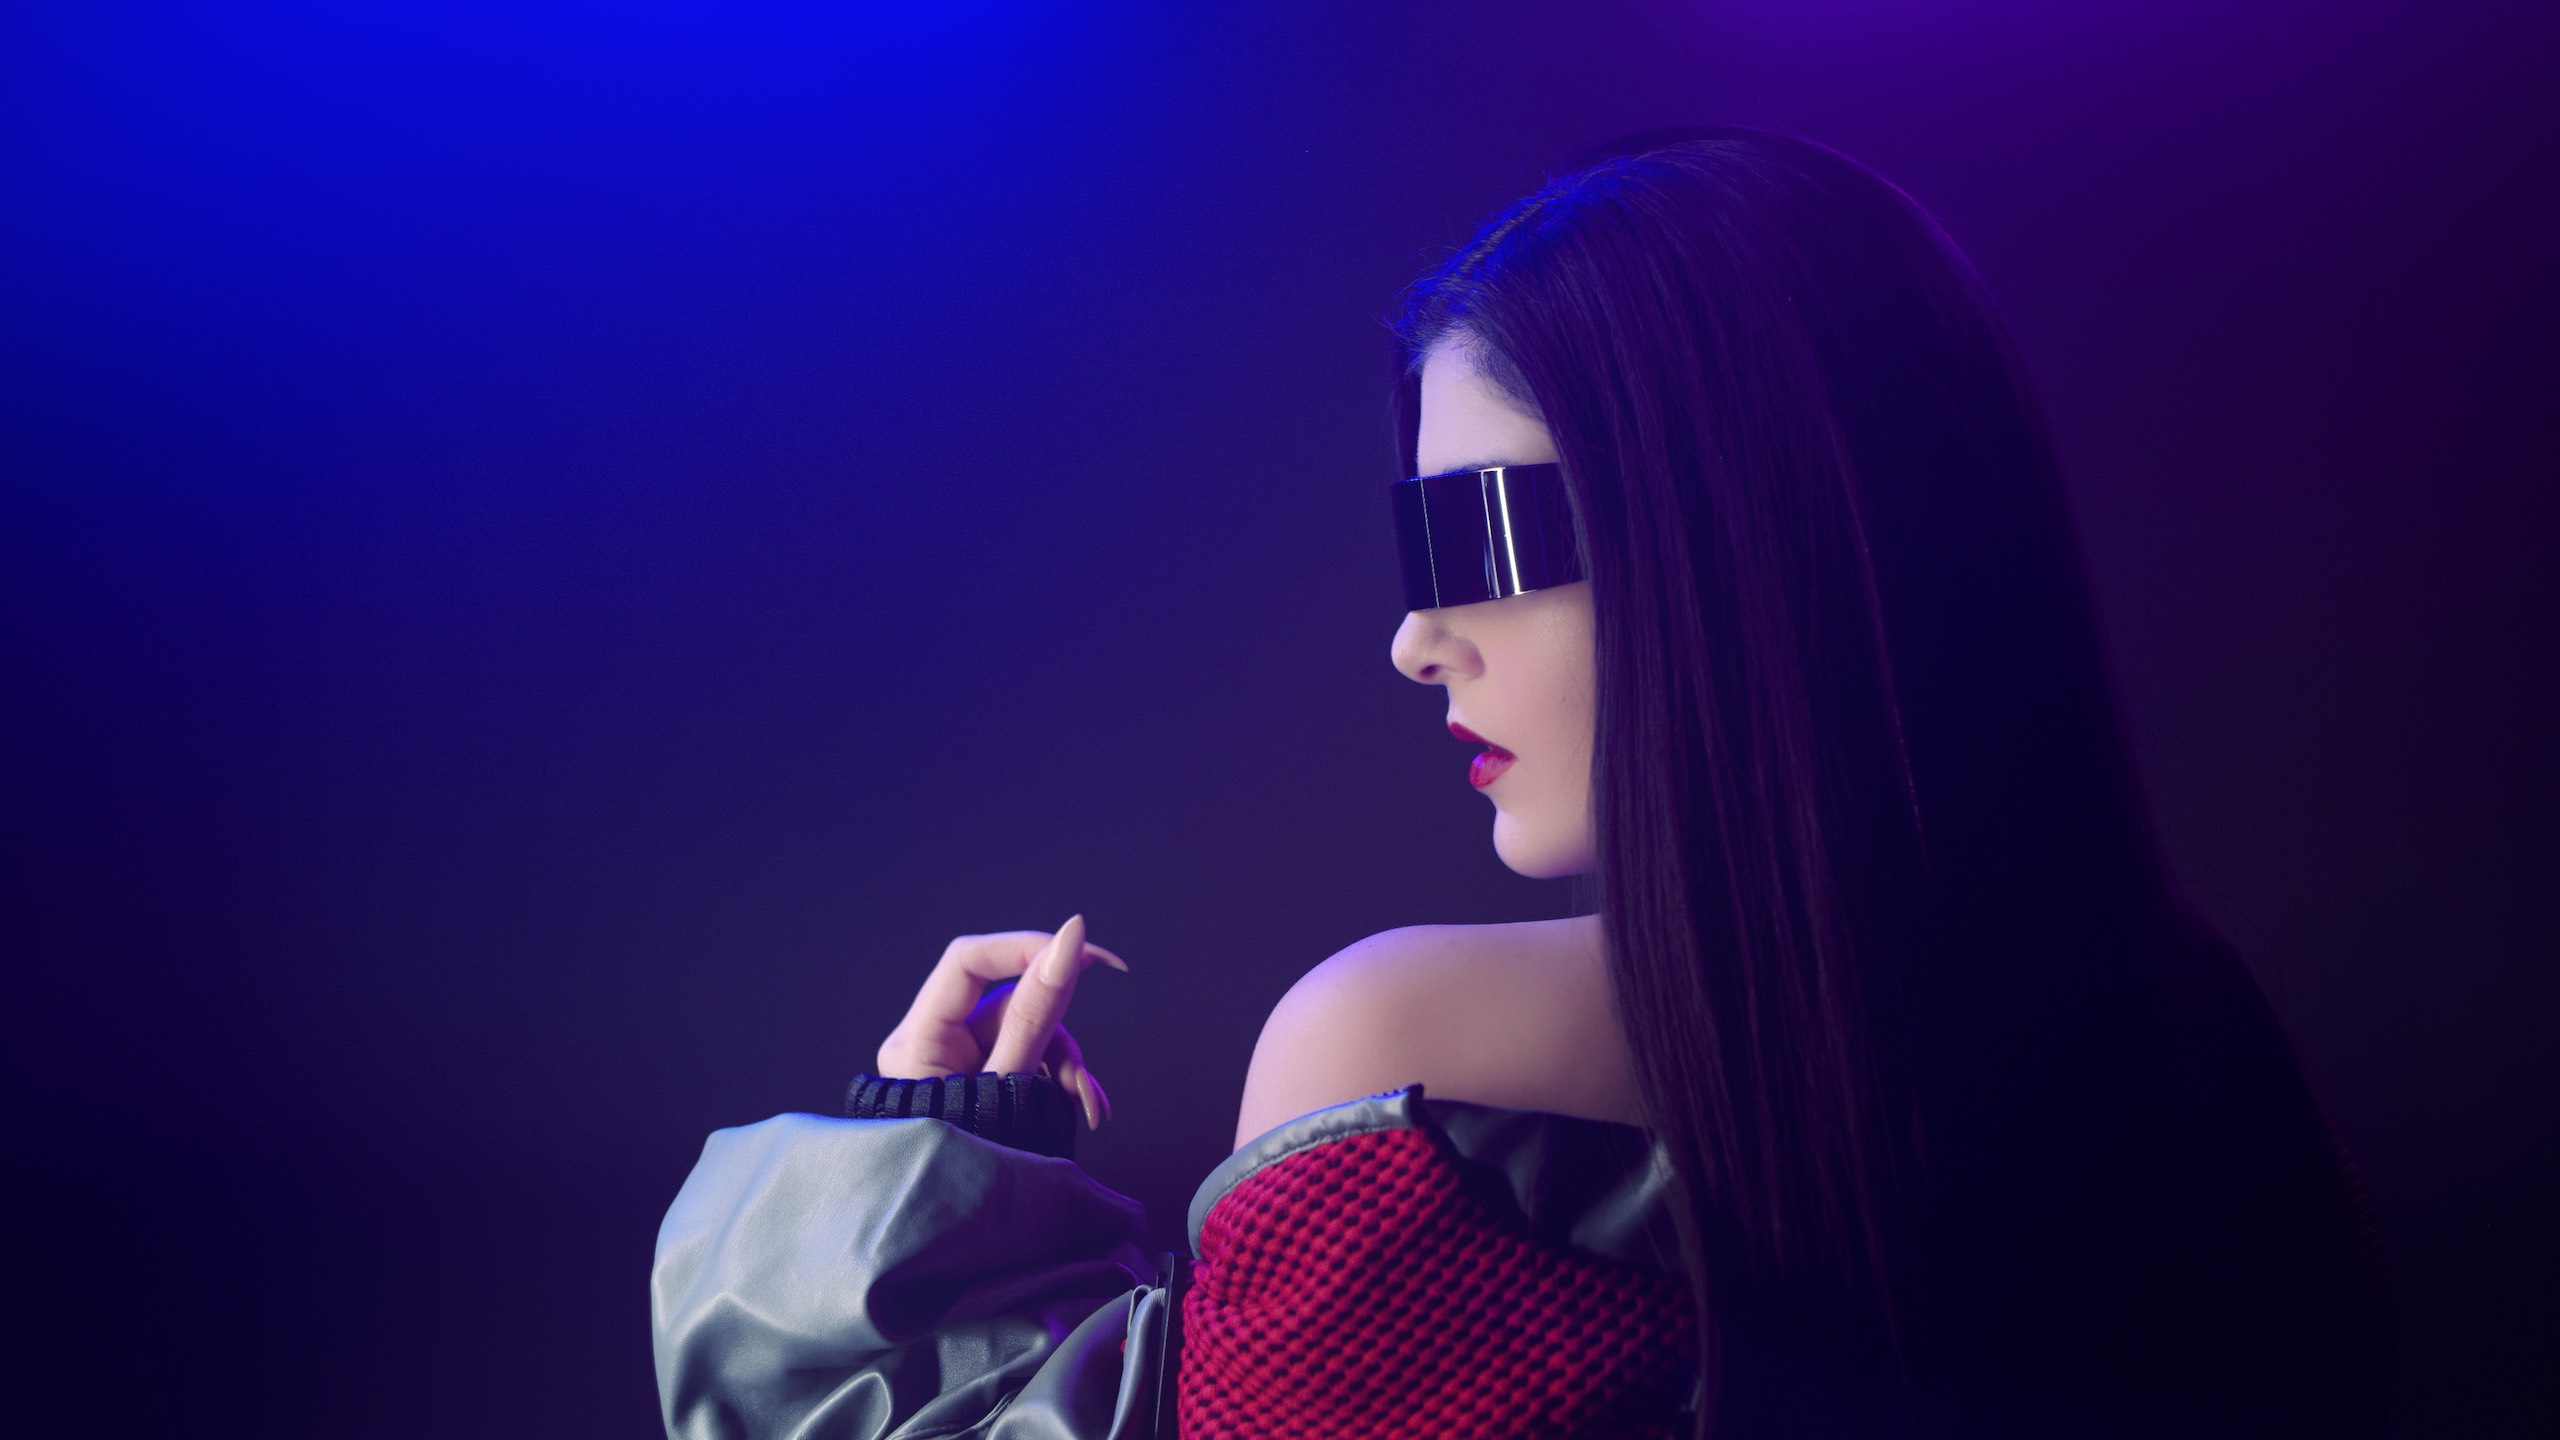 Audio Production View from behind of woman with long black hair wearing black shades and red and gray jacket